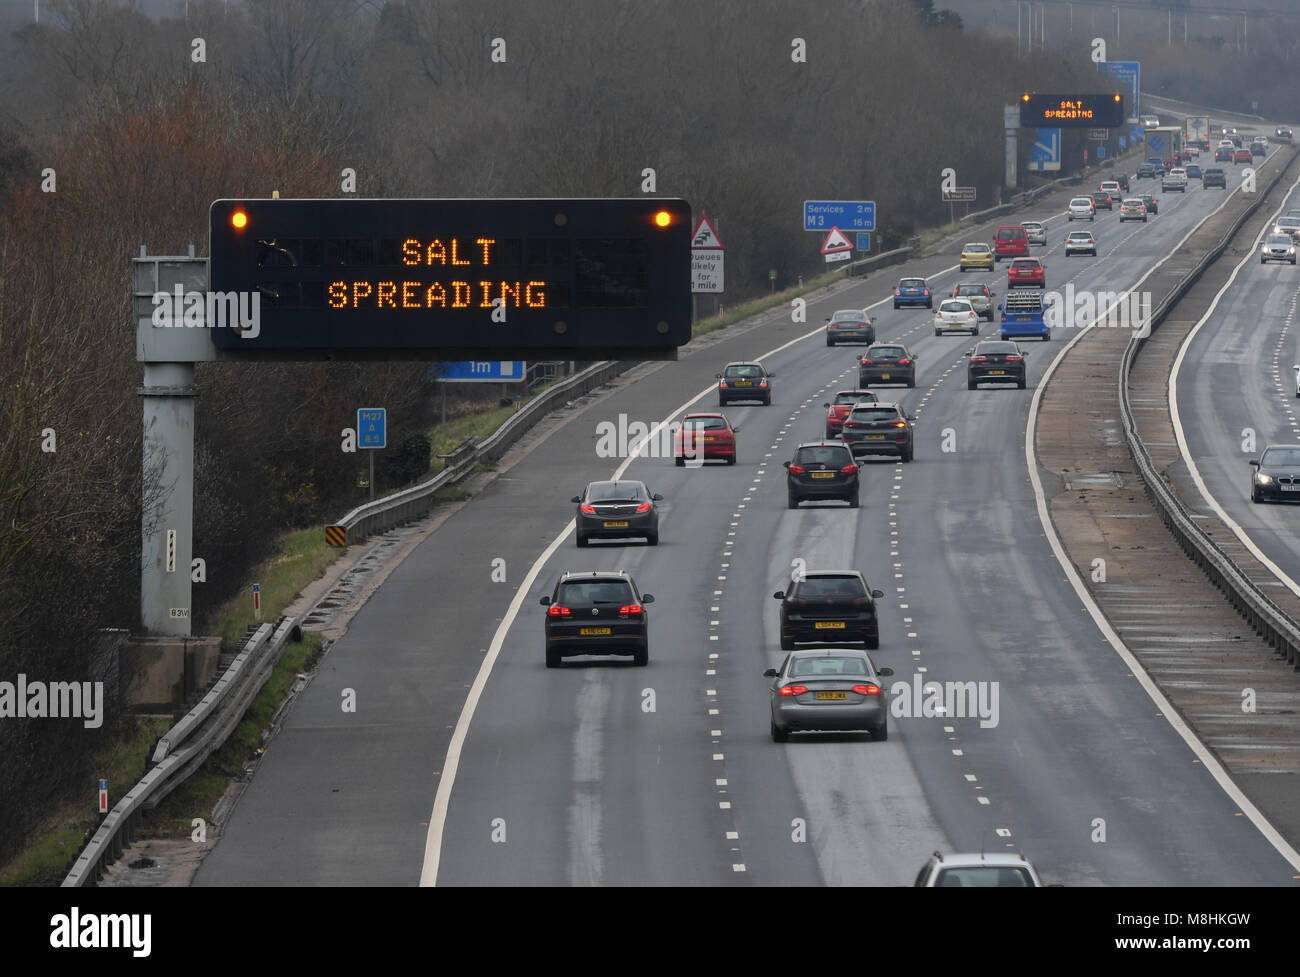 17th March 2018 Southampton UK weather. Salt spreading warning signs as the gritting trucks head out on the M27 motorway in Southampton, Hampshire, England as the country prepares for the visit of more severe weather named the mini beast from the east in the form of ice and snow. Credit: PBWPIX/Alamy Live News Stock Photo